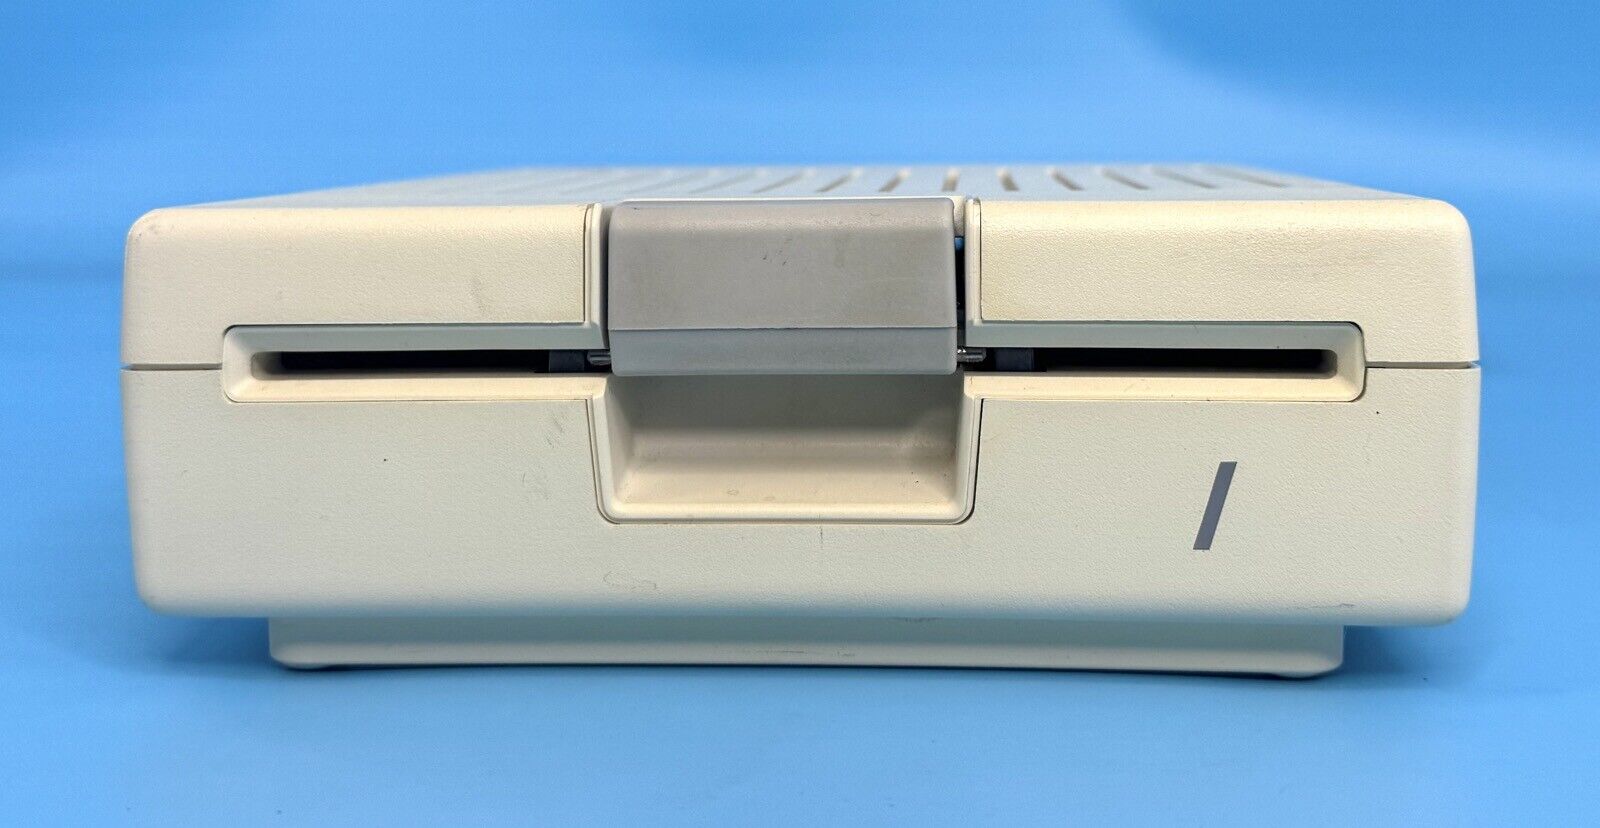 Apple Disk IIc – 5.25” Floppy Disk Drive – A2M4050 – Tested and Working